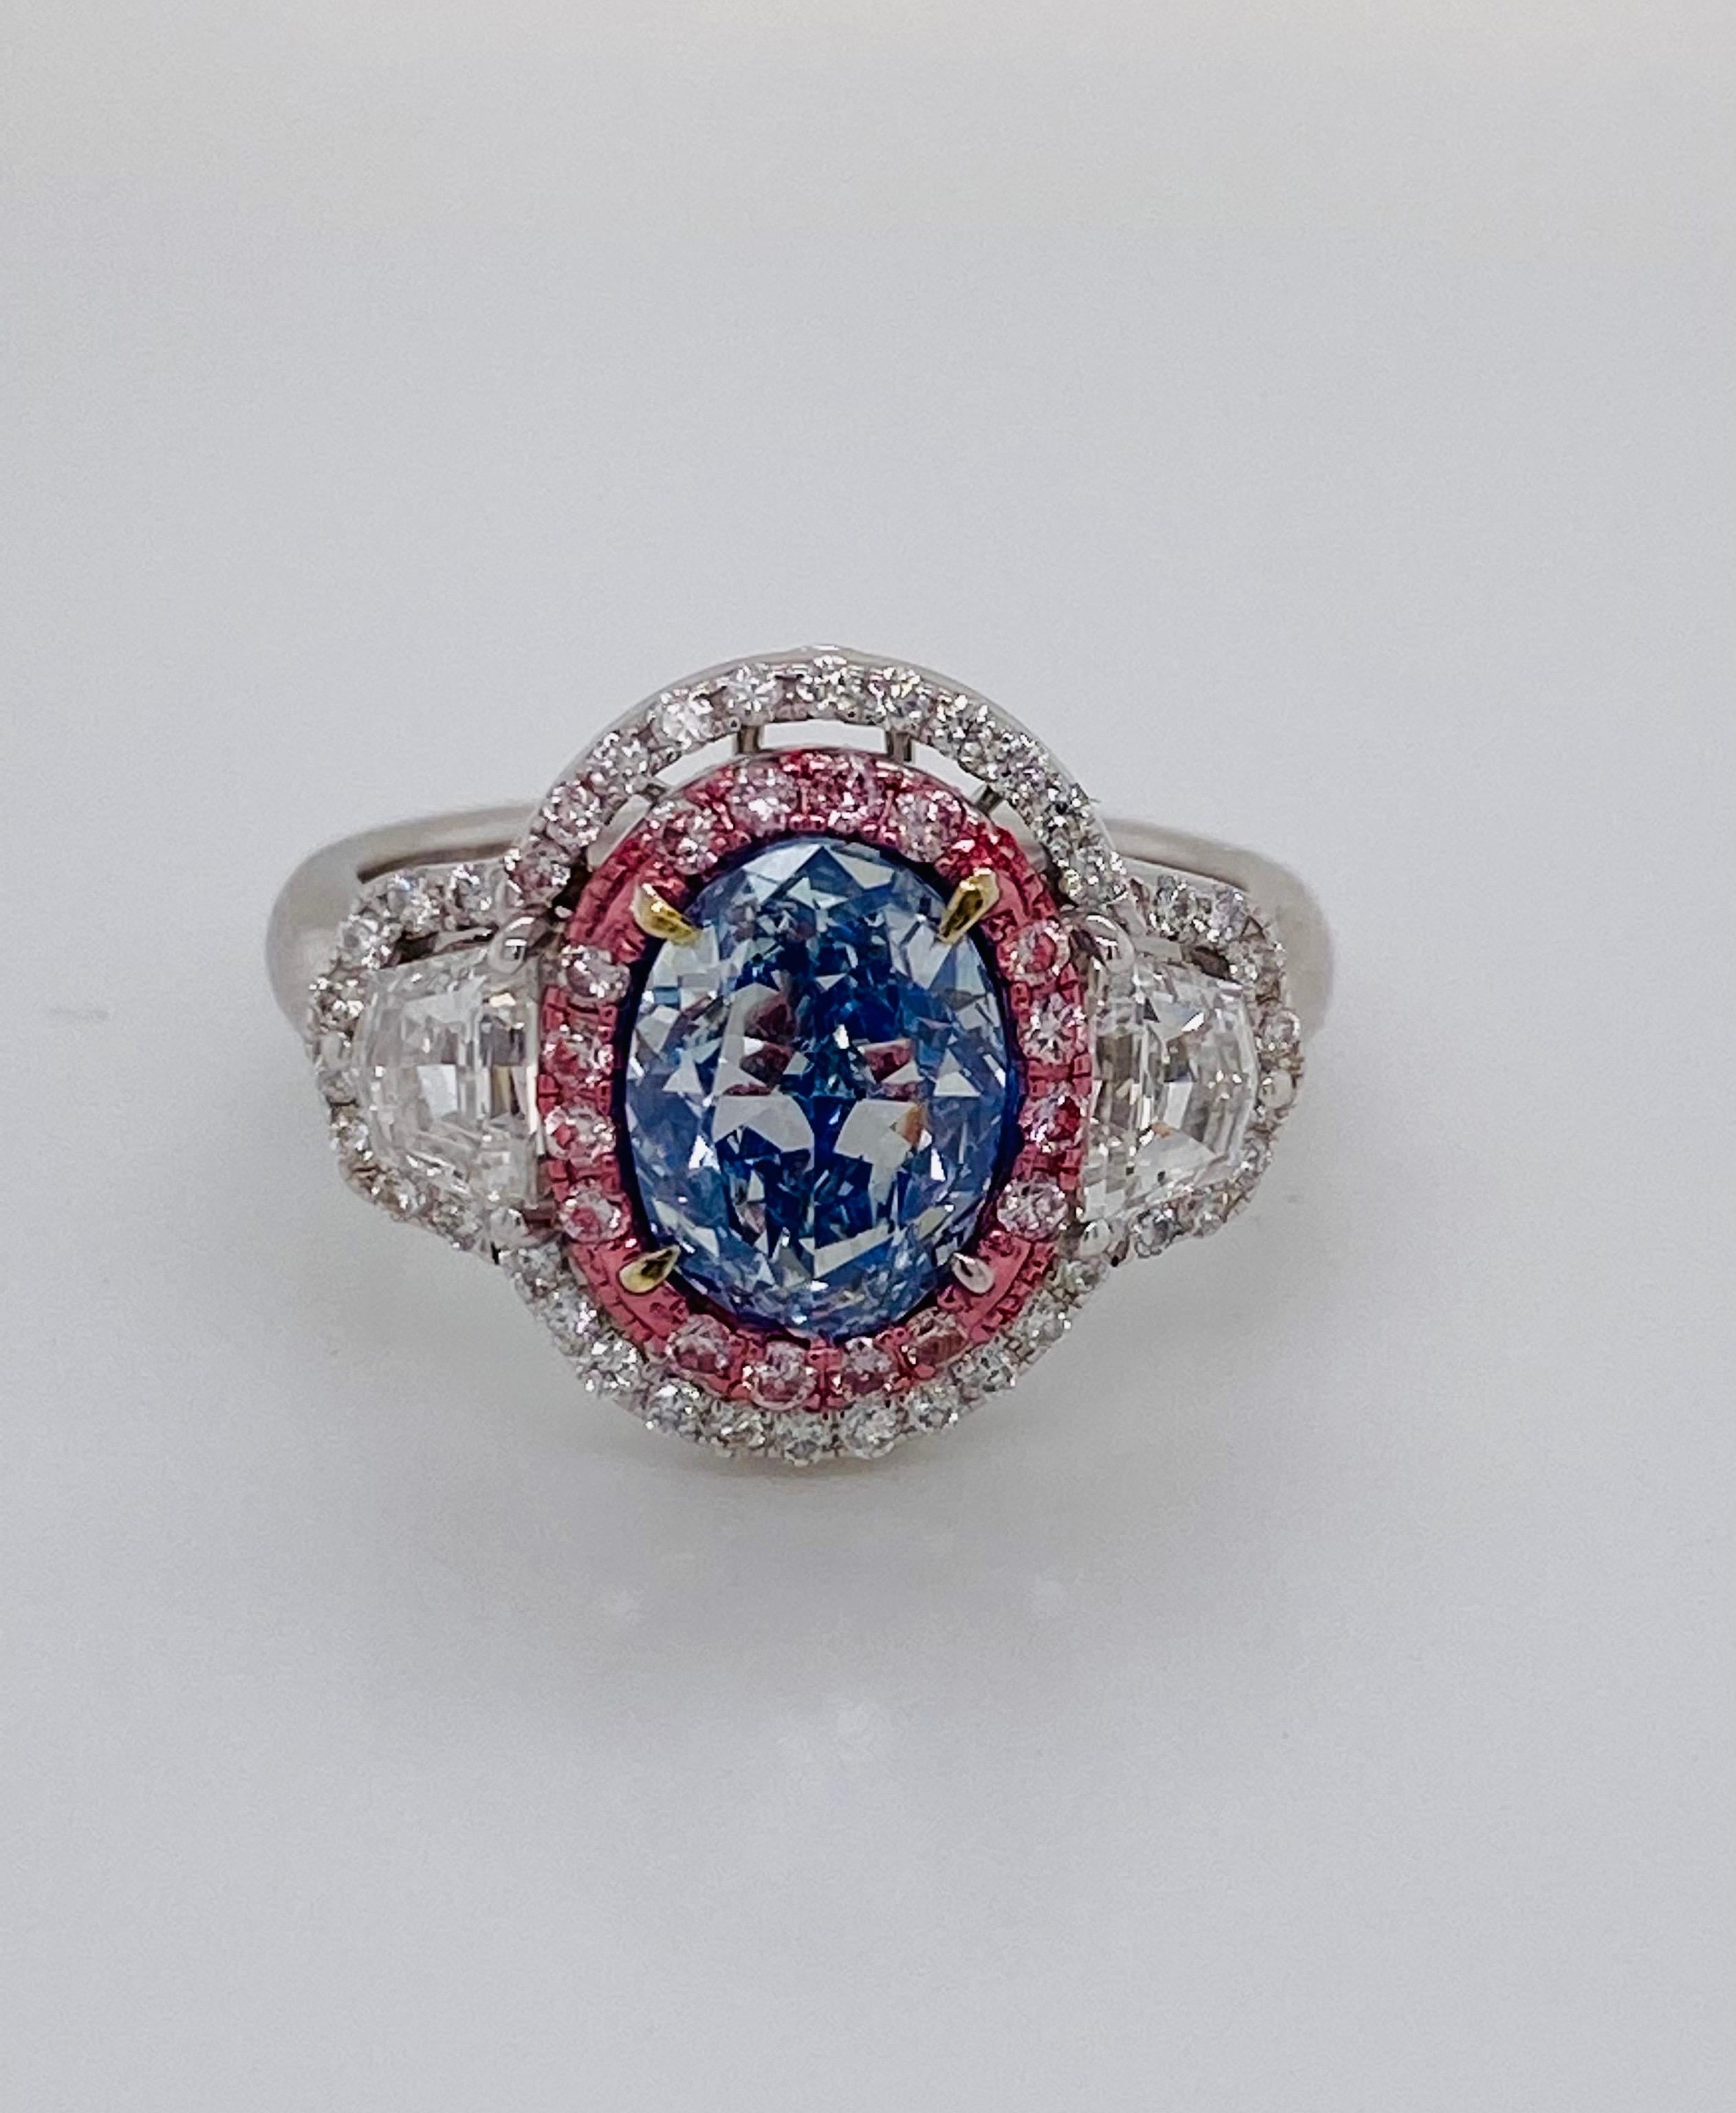 From the museum vault at Emilio Jewelry New York,
One of the rarest and only diamonds of its size and color. Please inquire for details. 